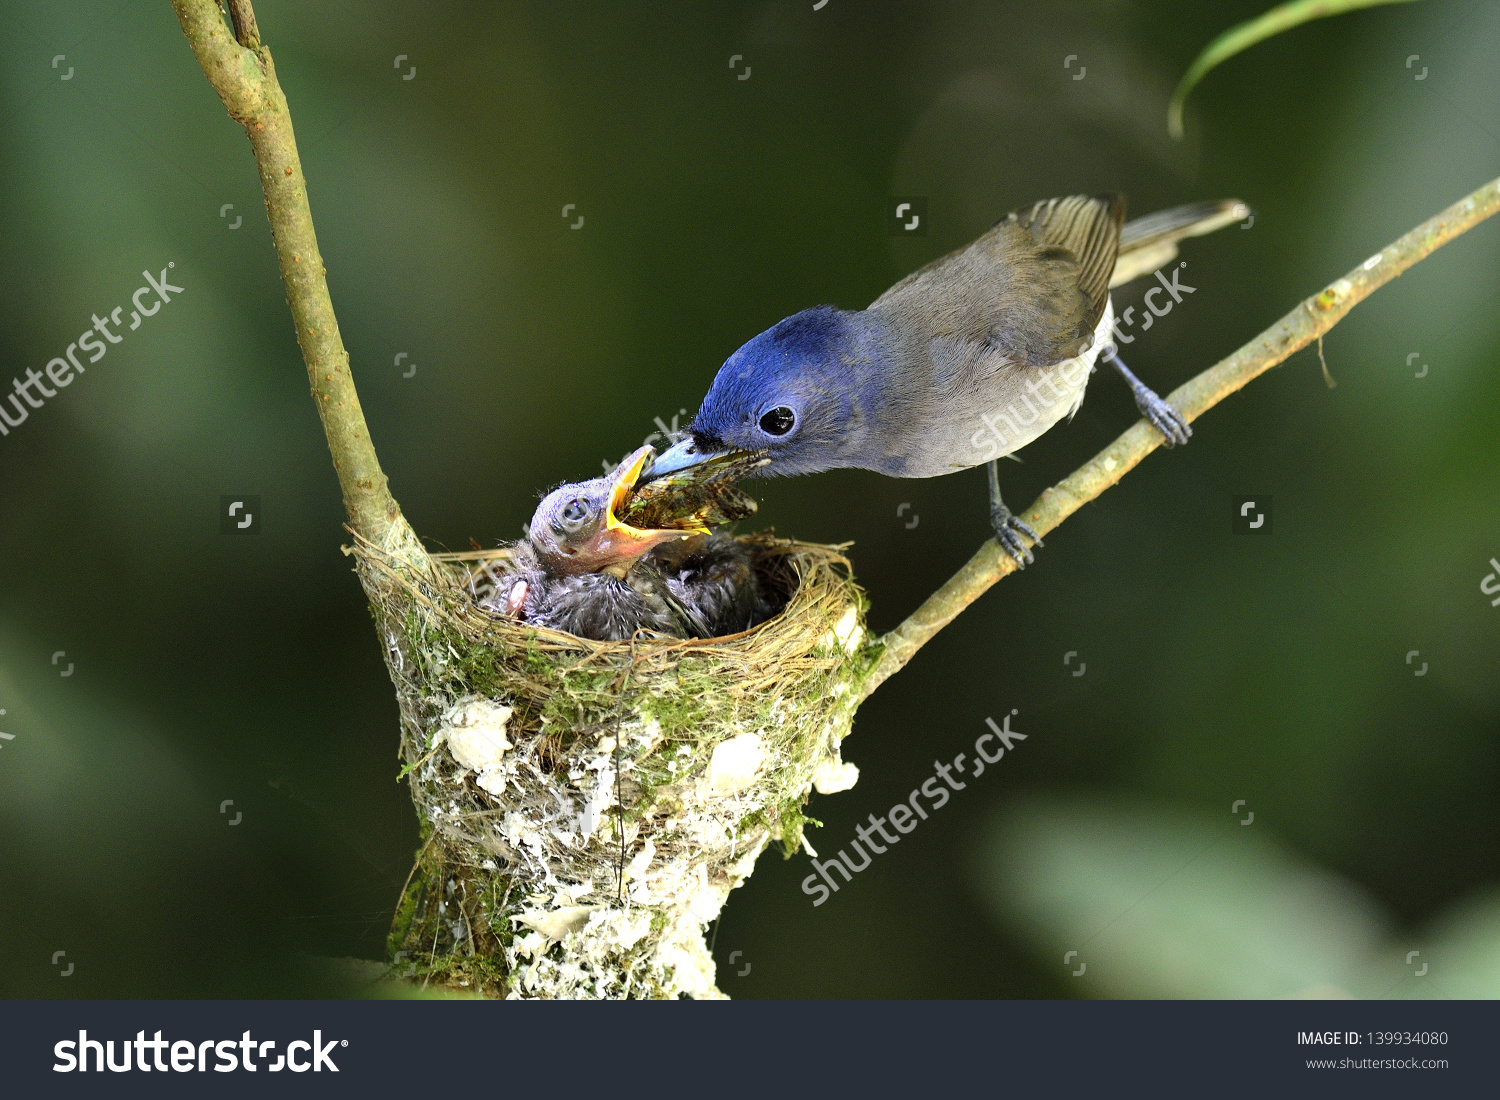 Black-naped Blue Monarch clipart #4, Download drawings